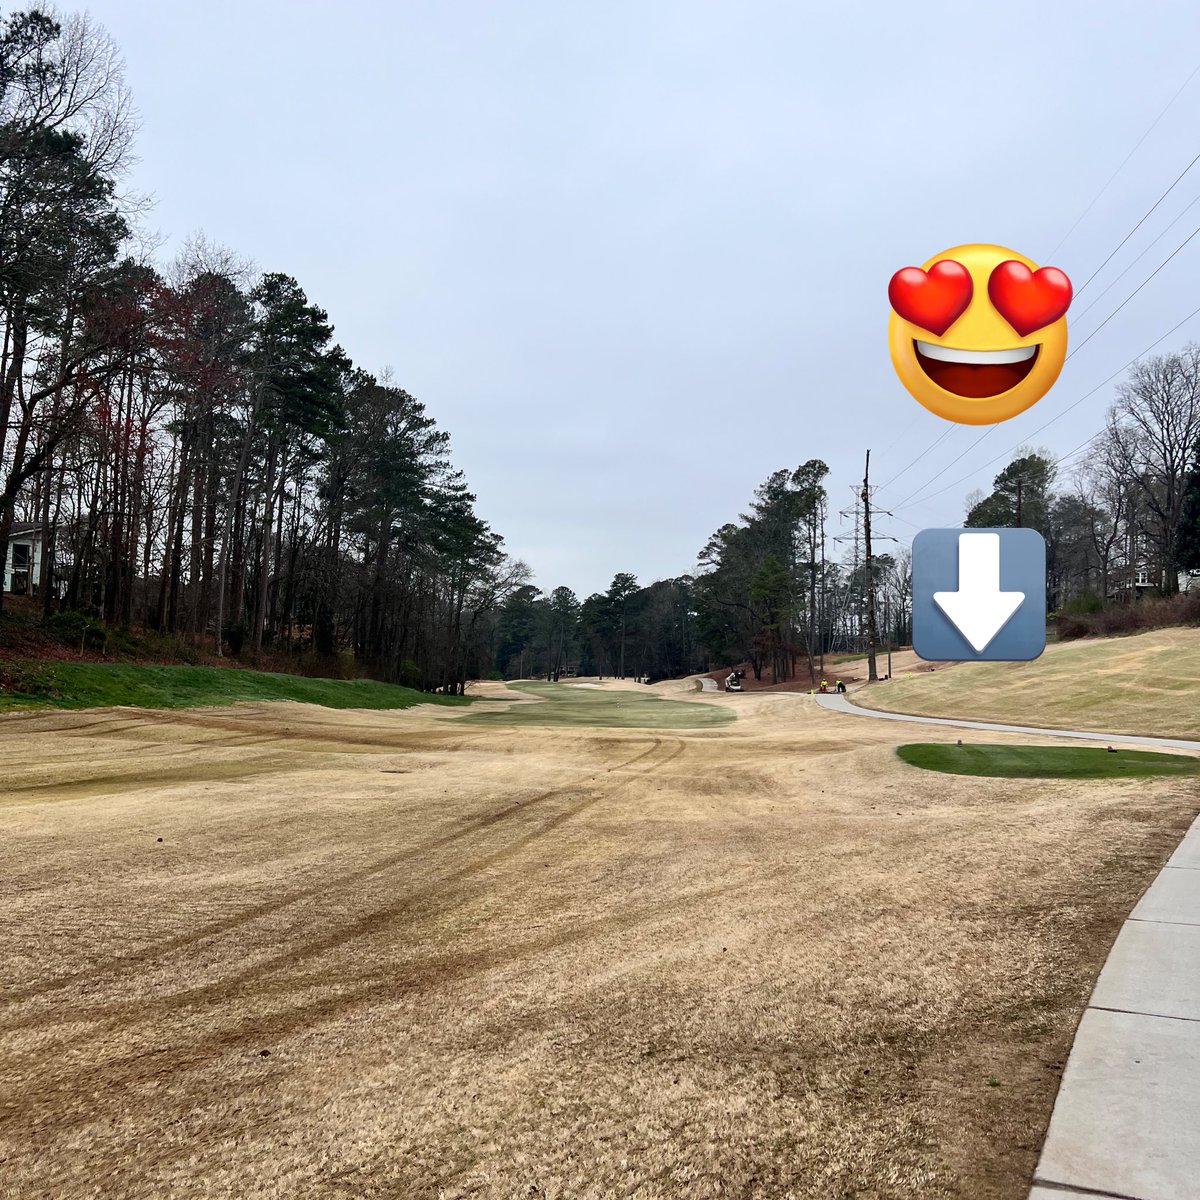 We gave this 419 tee an extra coat of @endurantpaint a month ago and this is the result—fyi: that is no longer the paint. Going forward, we will utilize this practice on tees that typically struggle out of dormancy for various reasons: shade, traffic, high demand, etc.